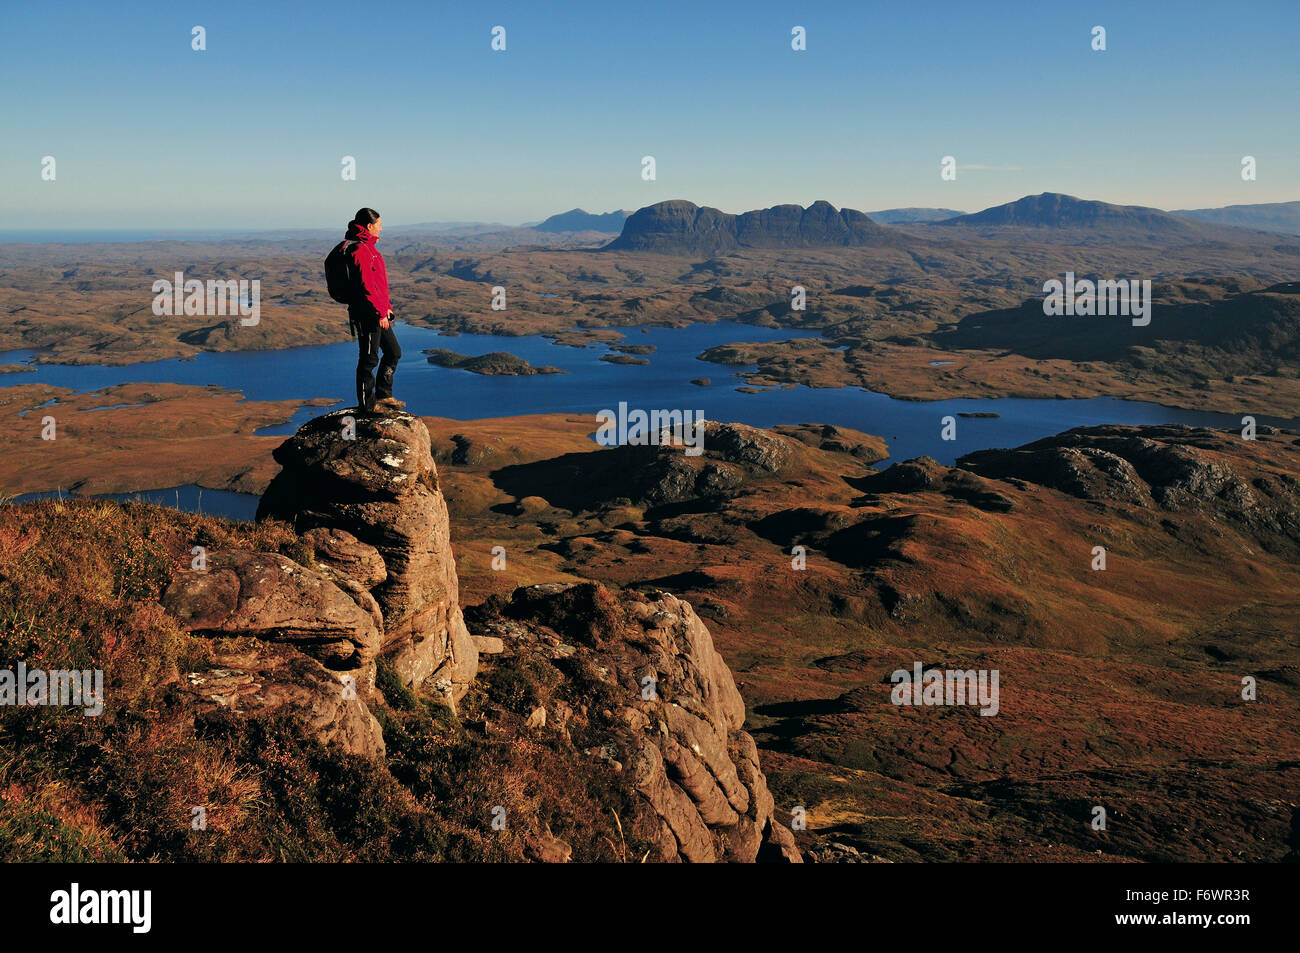 Female hiker at Stac Pollaidh, Suilven in background, Inverpolly Nature Reserve, Highlands, Scotland, Great Britain Stock Photo